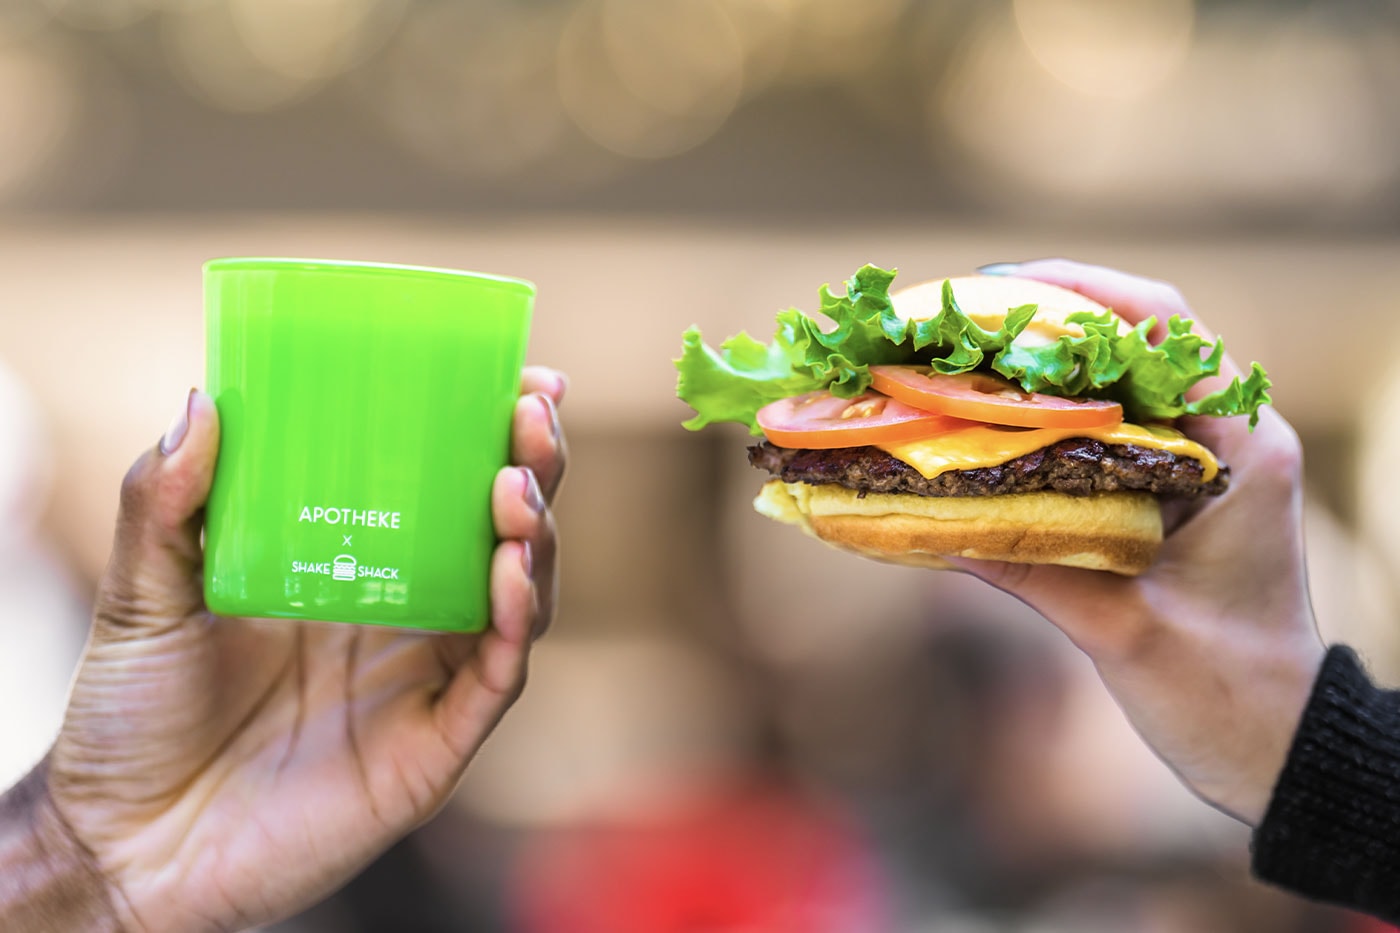 Shake Shack Apotheke Burger and Fries Candles Release Info